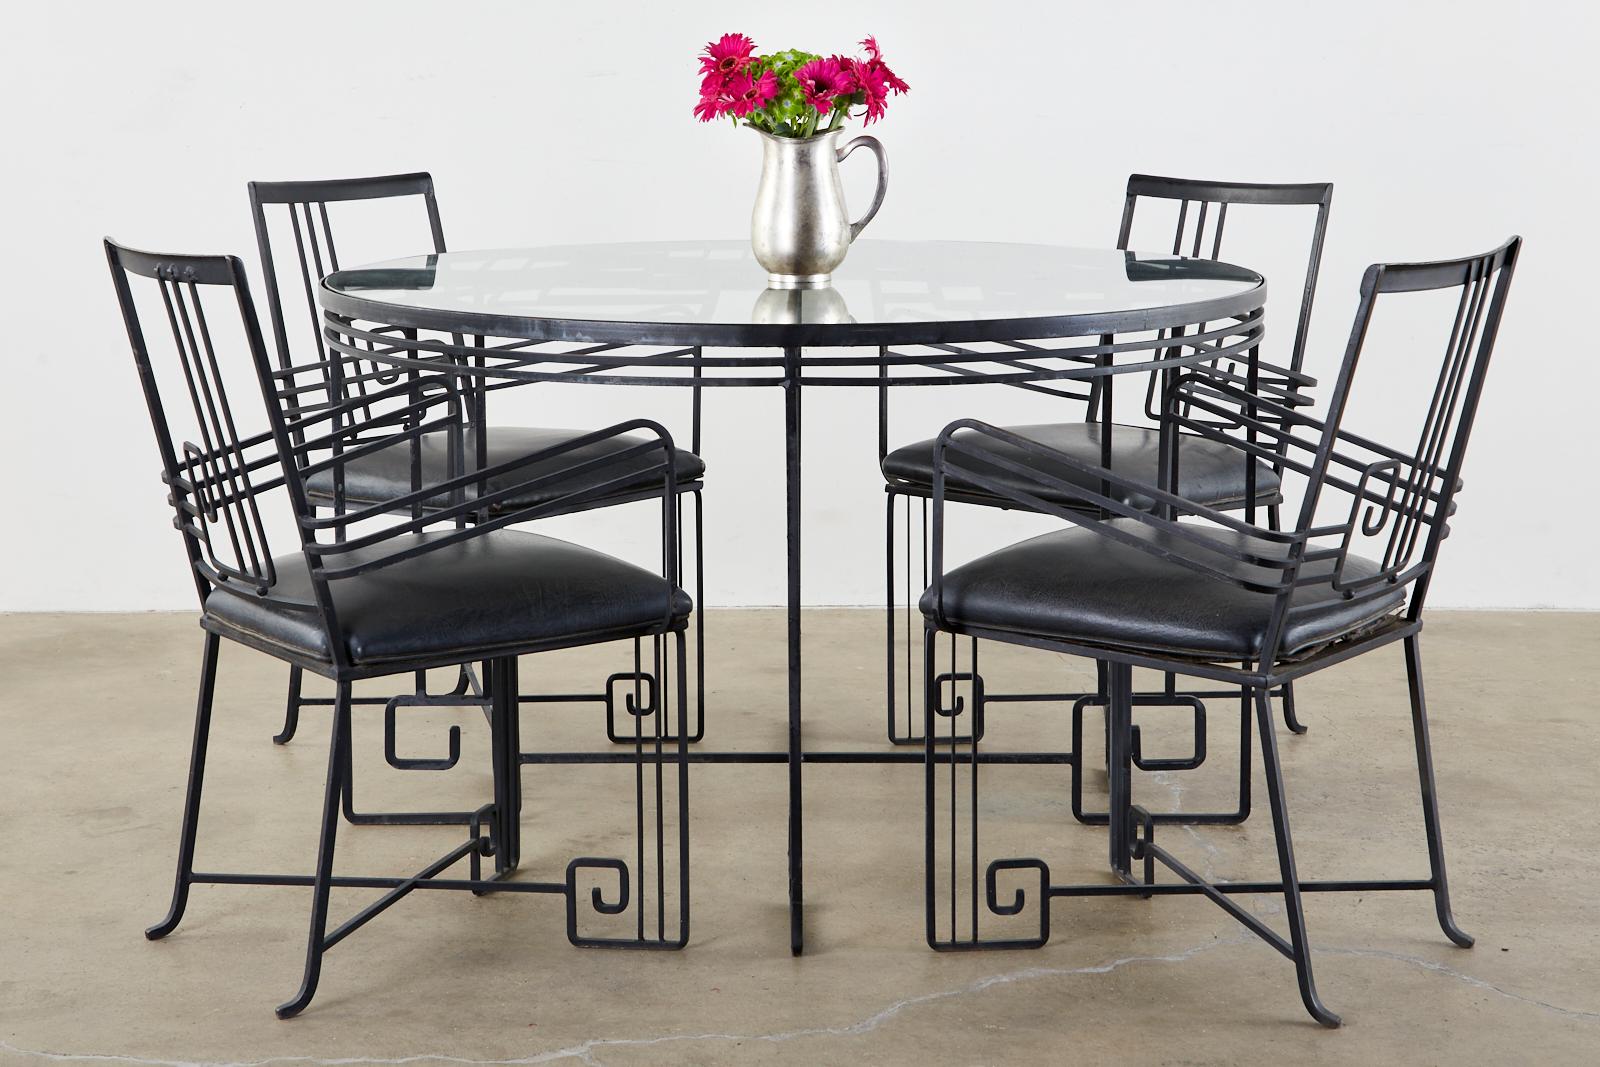 Midcentury wrought iron garden or patio table crafted in the Art Deco taste featuring neoclassical Greek key motifs on the top and legs. Reminiscent of John Salterini's Mid-Century Modern designs of iron furniture showcasing Greek key patterns. The